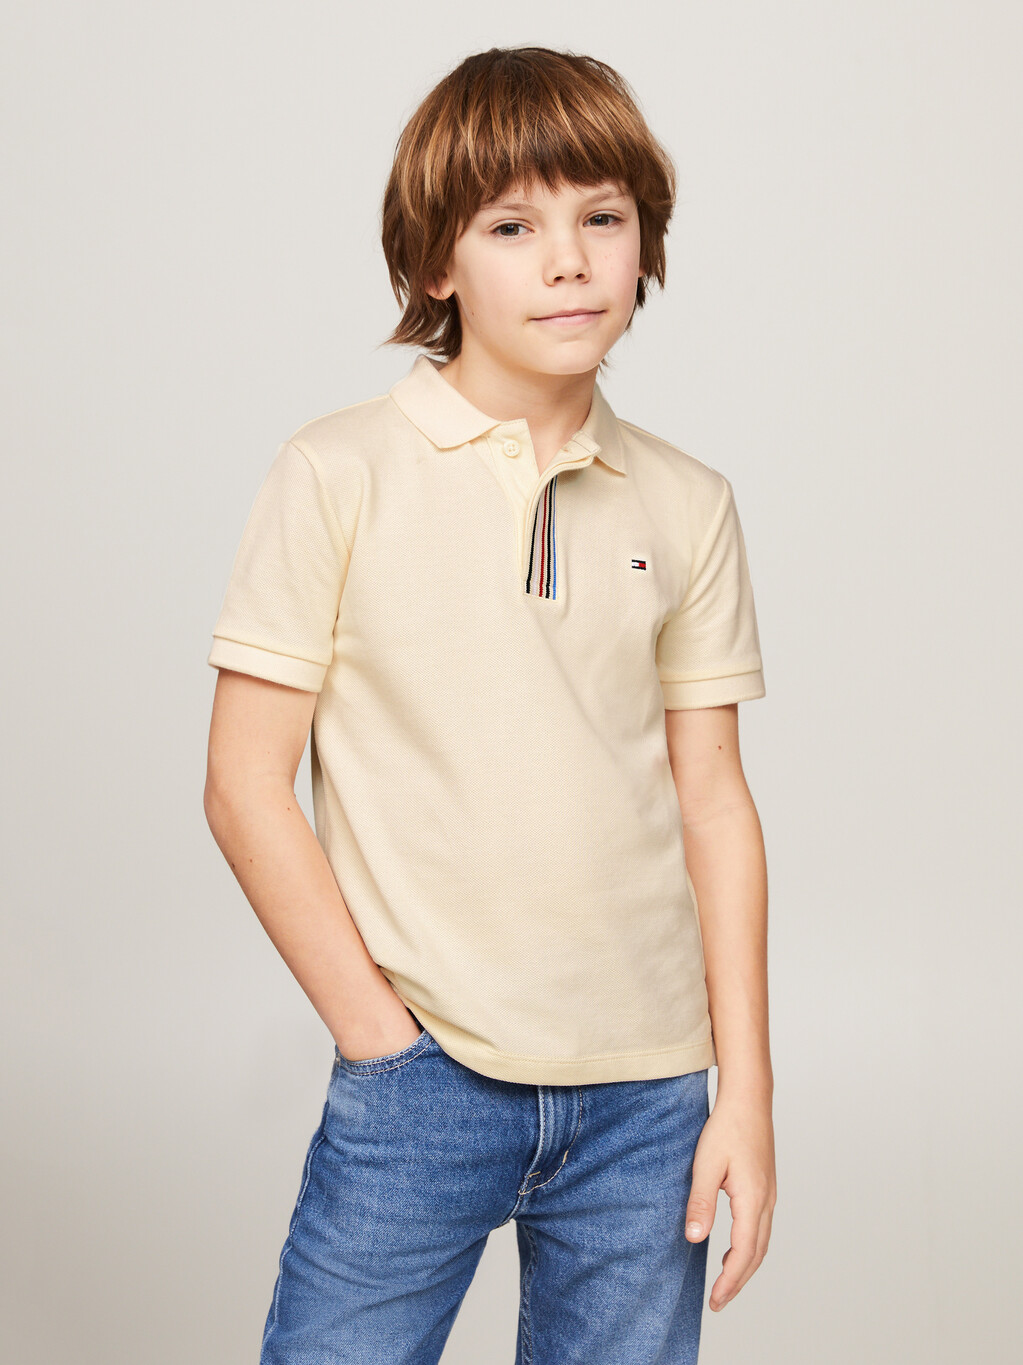 Global Stripe Concealed Placket Polo, Calico, hi-res